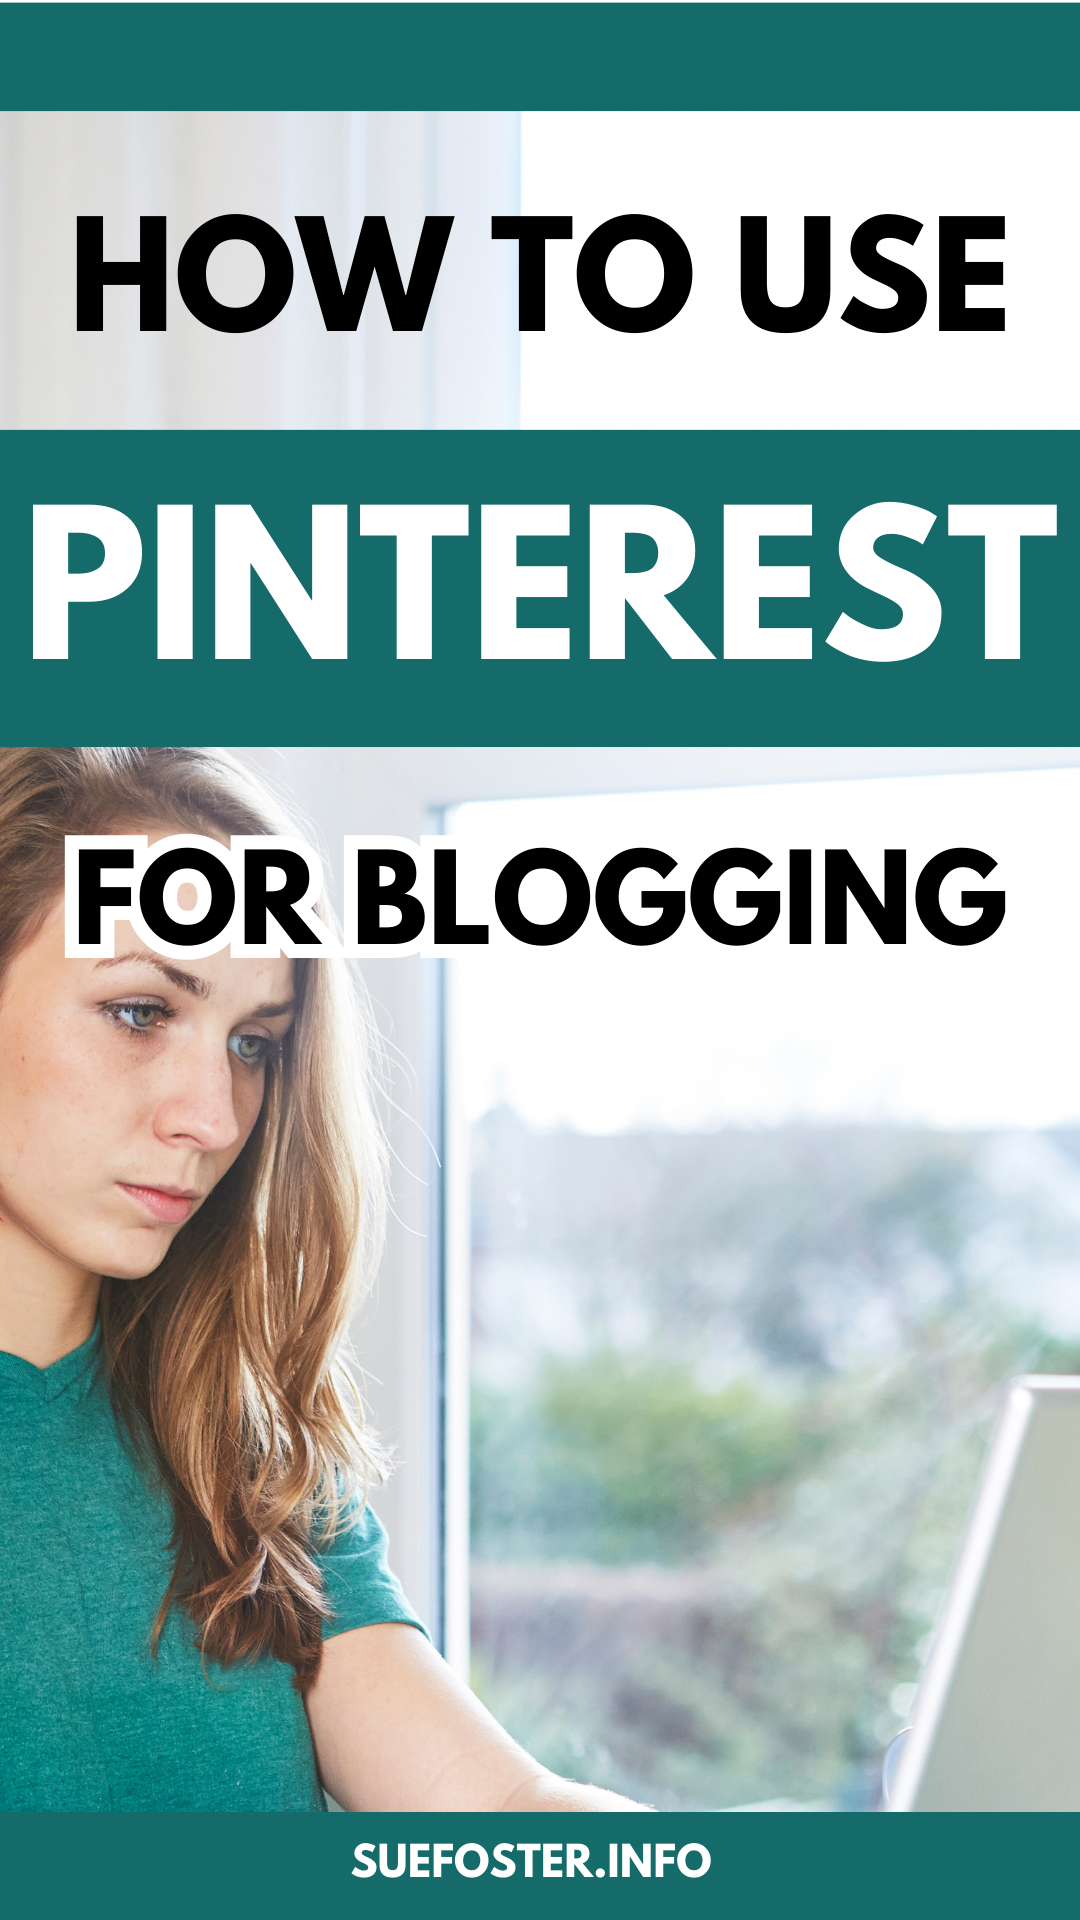 How to use Pinterest for your blog! Learn how to create, optimize, and engage effectively. Drive traffic and boost your blog's success.